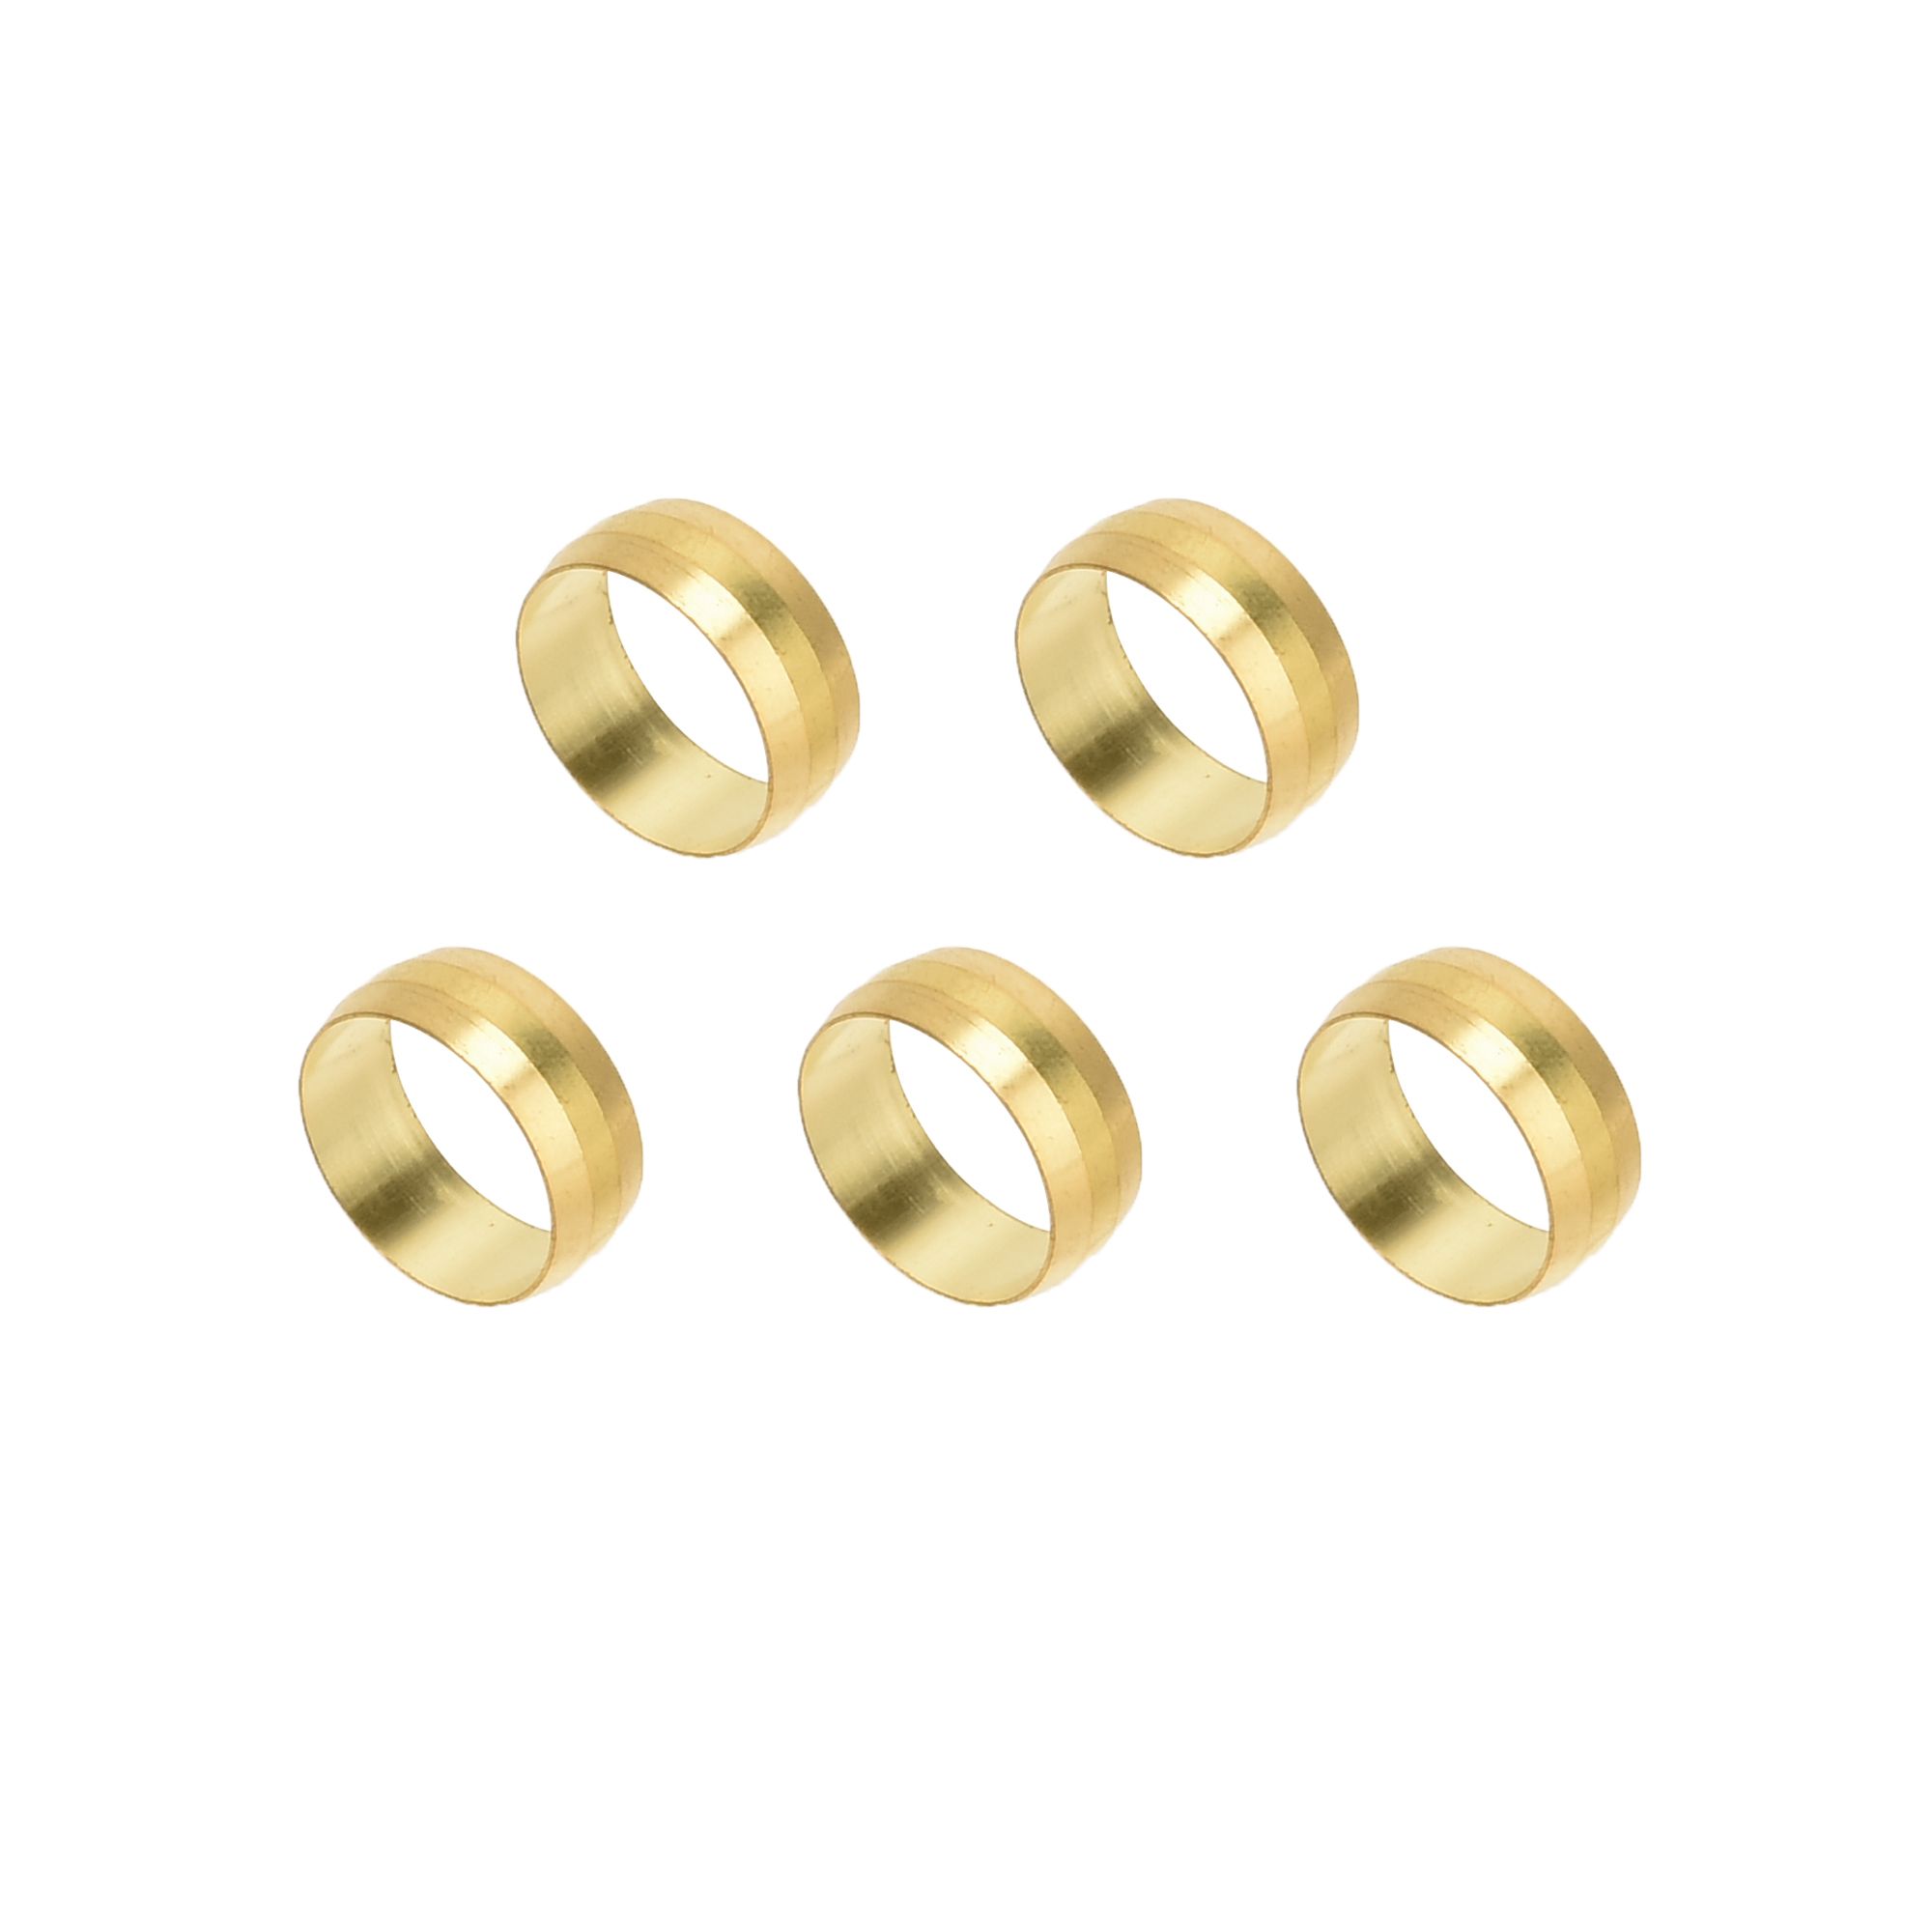 Plumbsure Brass Compression Olive (Dia)15mm, Pack of 100